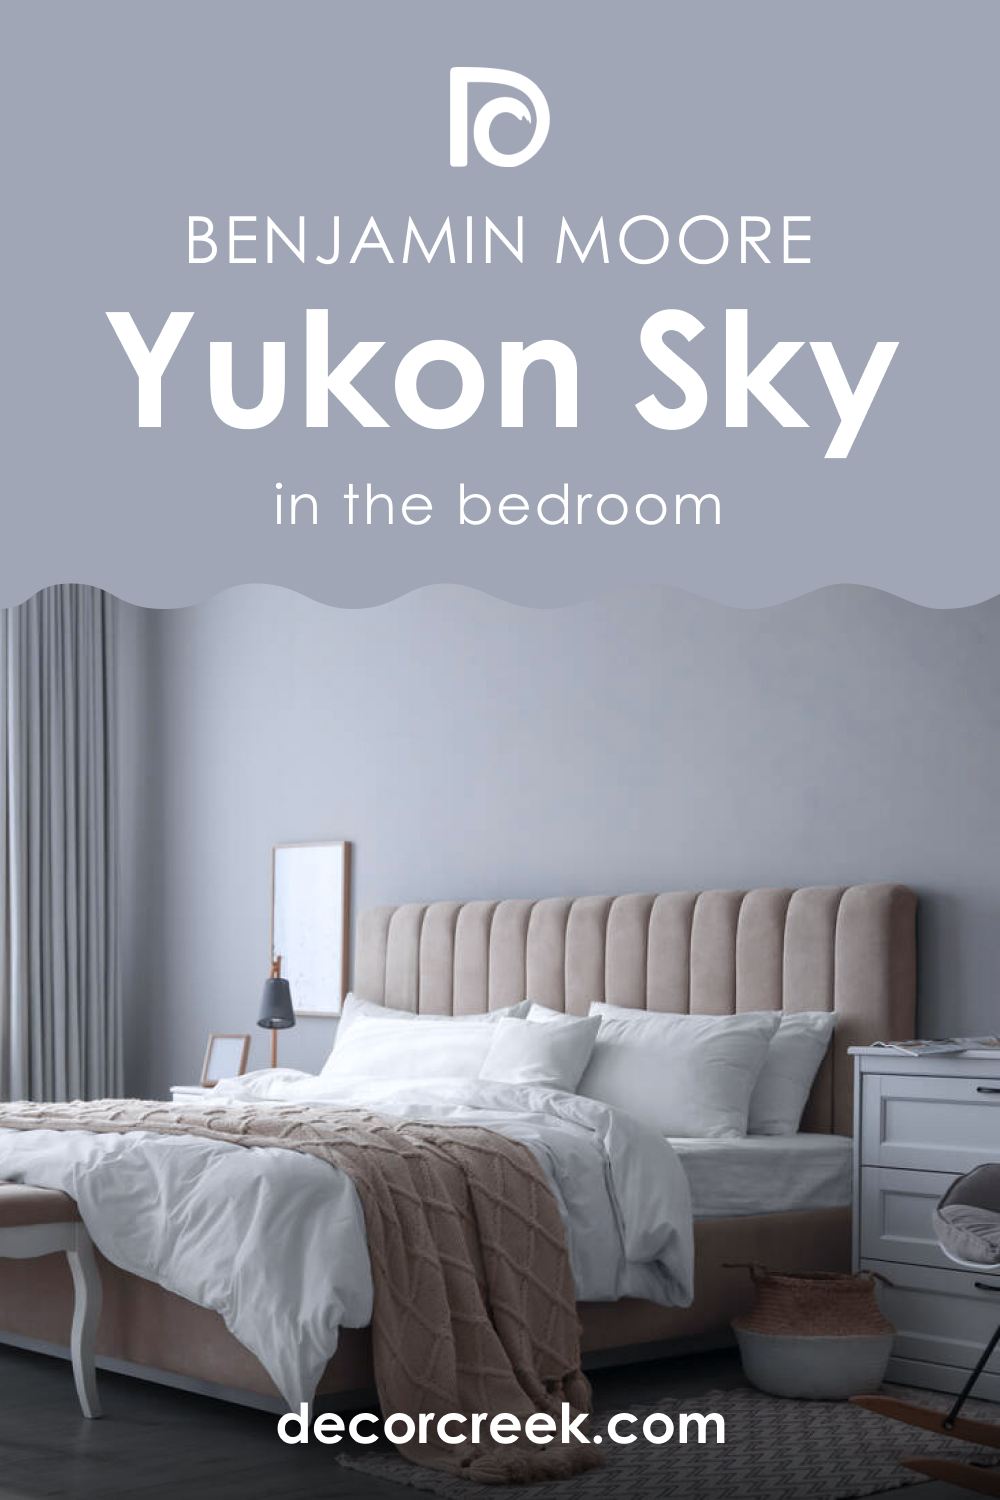 How to Use Yukon Sky 1439 in the Bedroom?